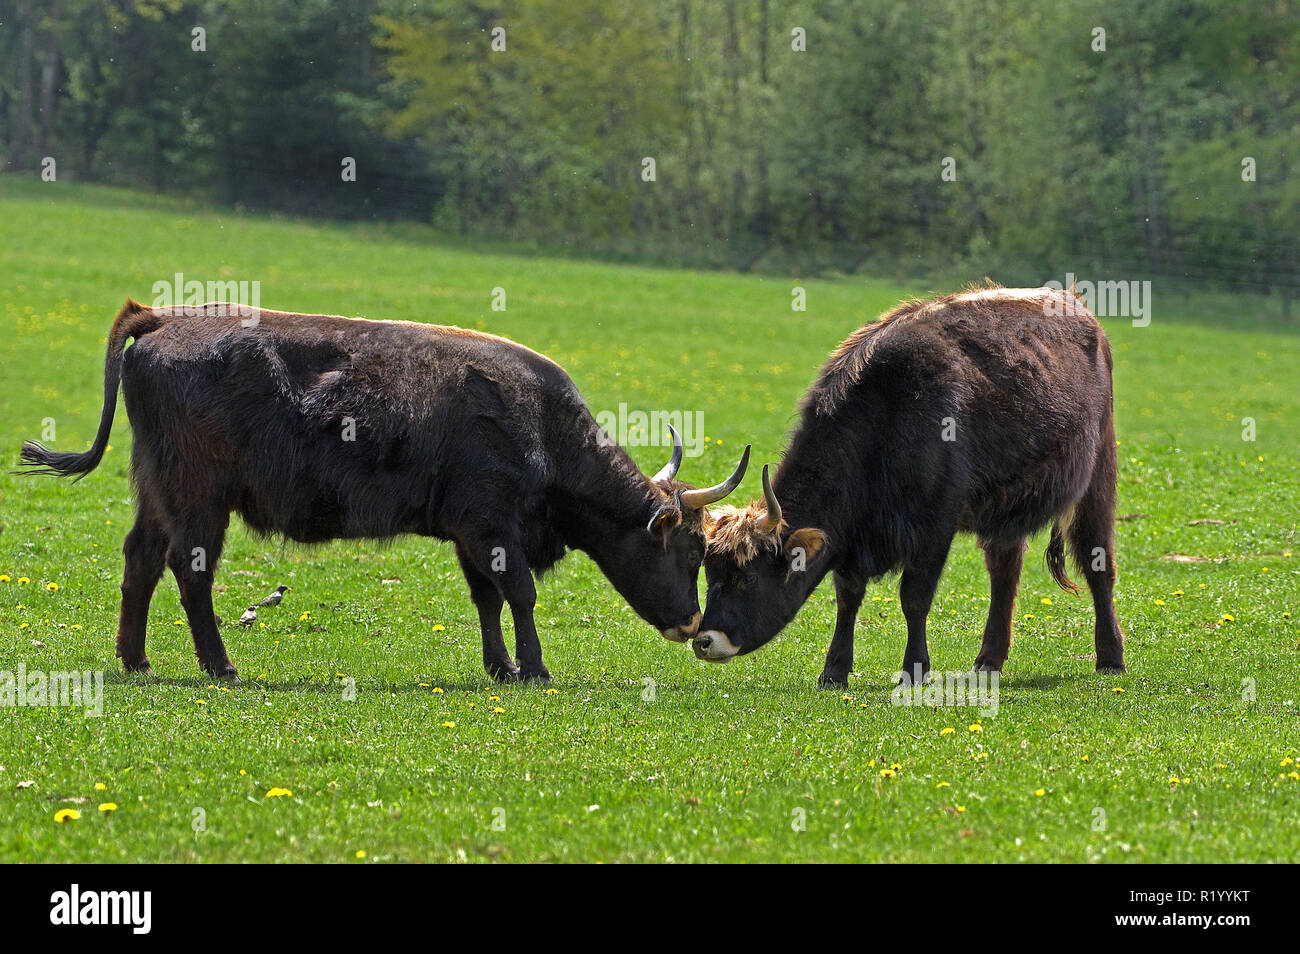 Recreated Aurochs, Heck Cattle (Bos primigenius primigenius). Two cows on a meadow, sniffing at each other. Germany Stock Photo